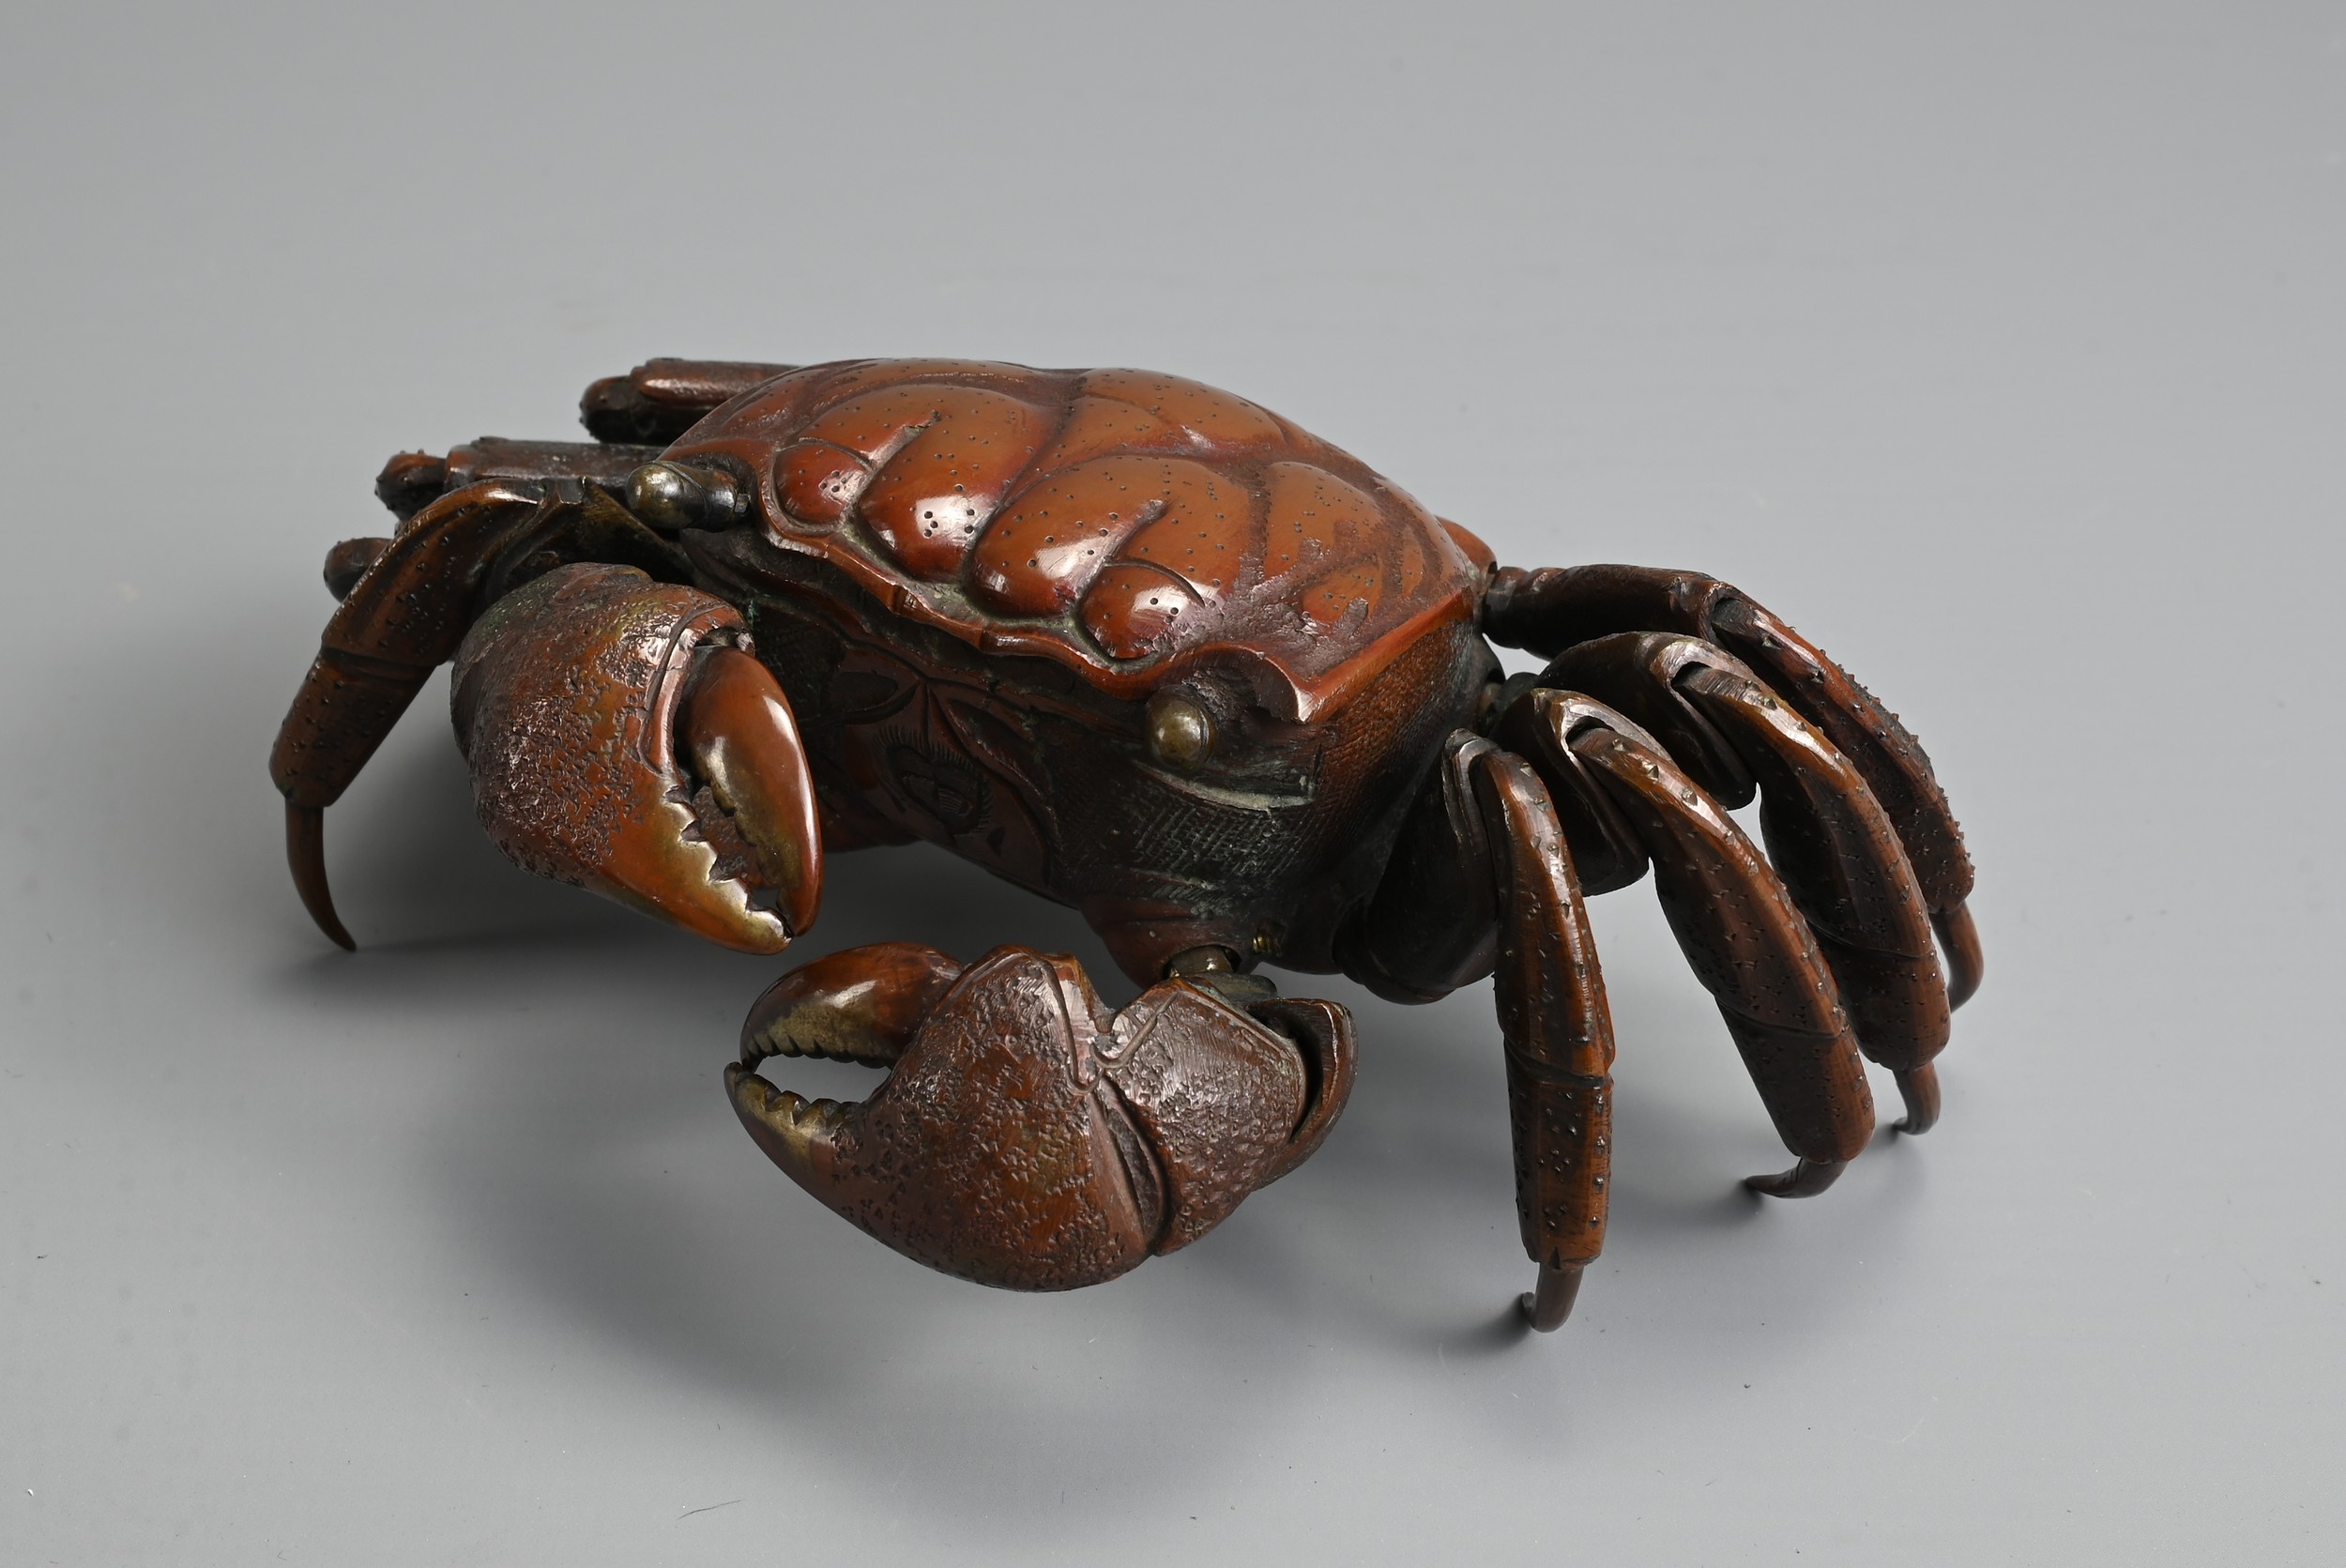 A JAPANESE MEIJI PERIOD (1868-1912) BRONZE JIZAI OKIMONO OF A CRAB. With articulated legs, claws and - Image 7 of 7